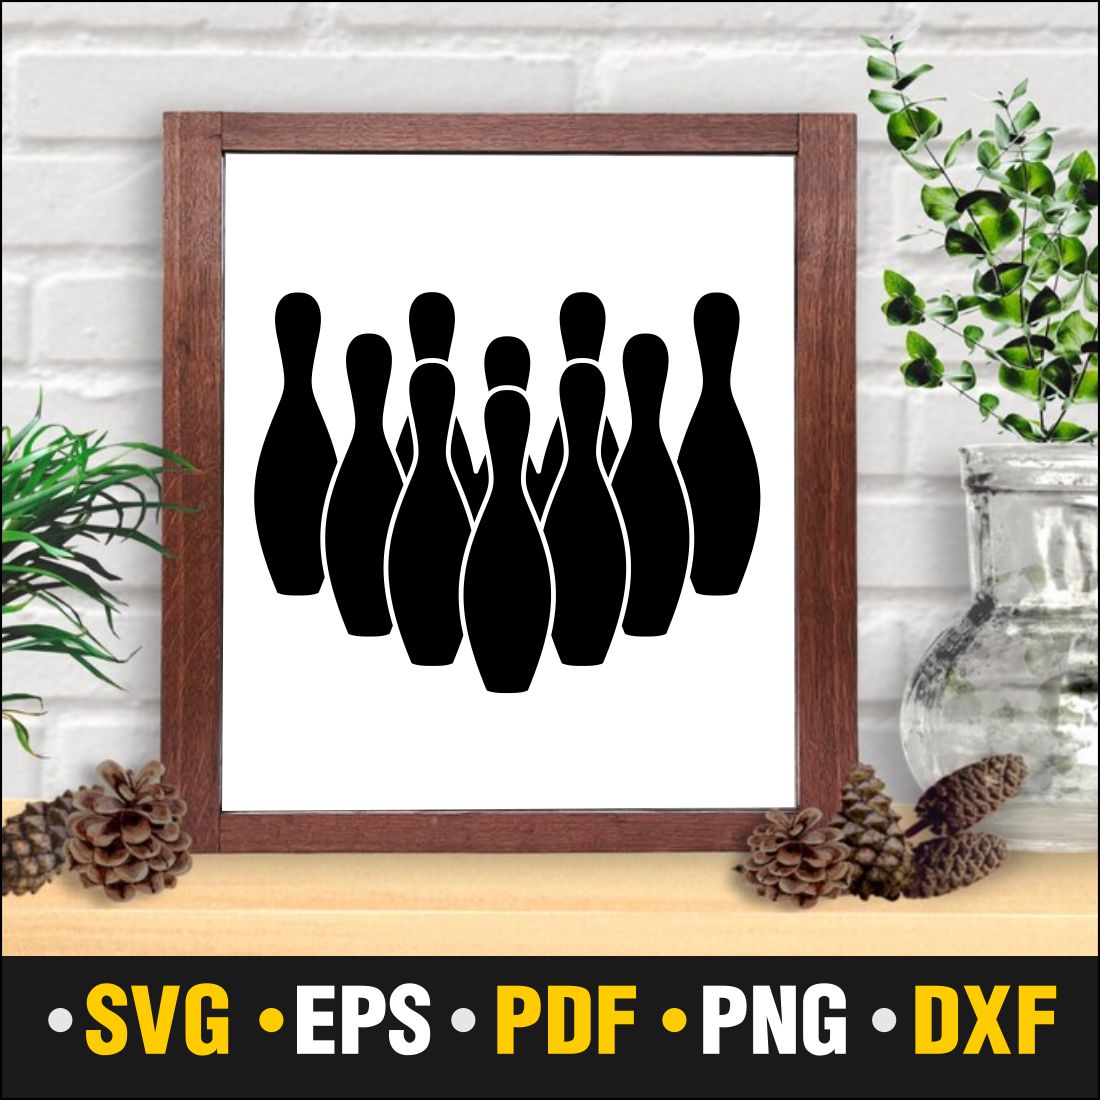 Bowling Ball Svg, Bowling Ball Frame Svg Vector Cut file Cricut, Silhouette, Pdf Png, Dxf, Decal, Sticker, Stencil, Vinyl preview image.